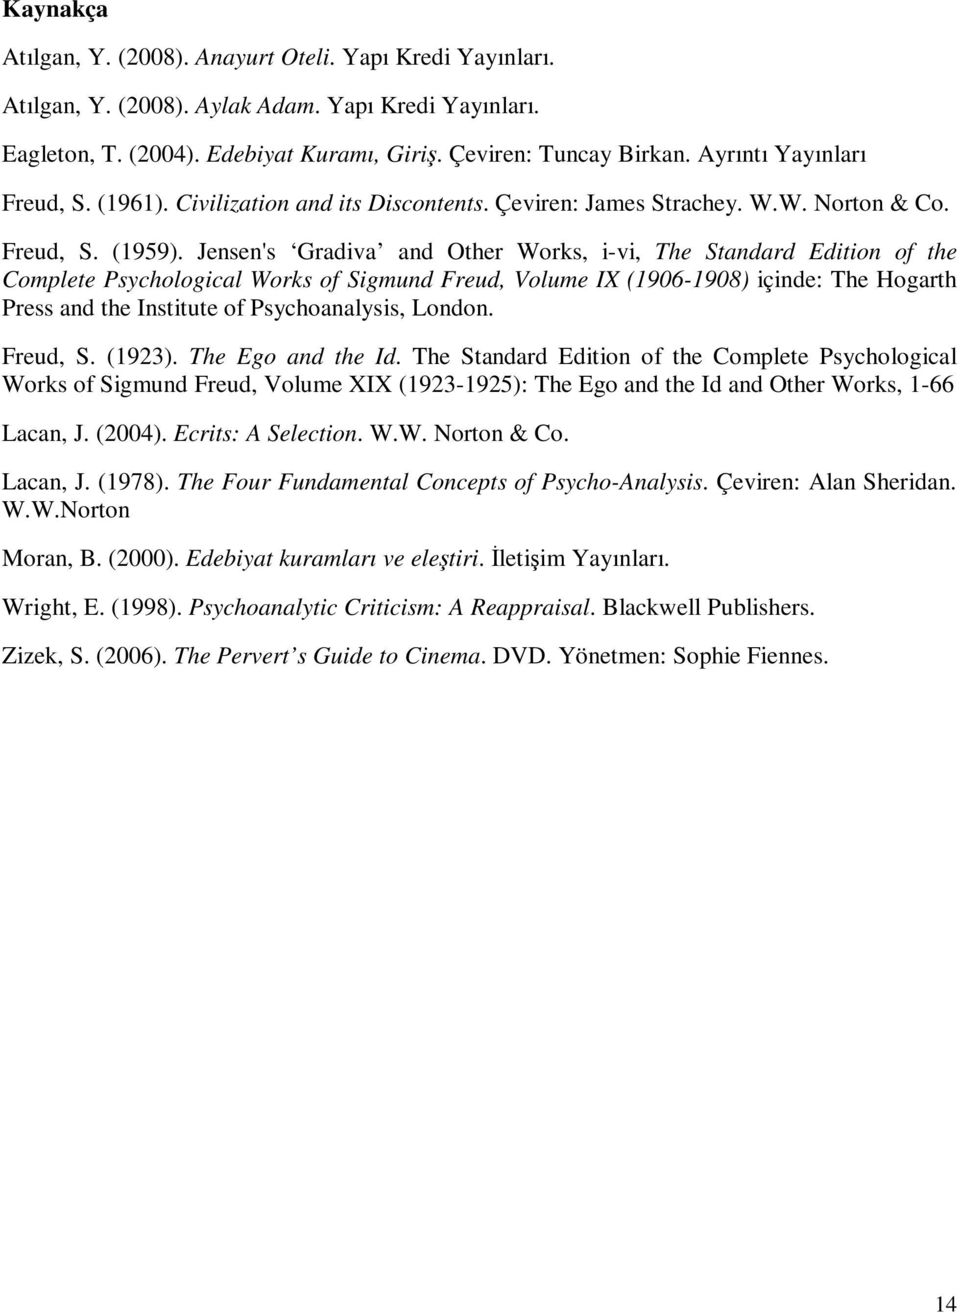 Jensen's Gradiva and Other Works, i-vi, The Standard Edition of the Complete Psychological Works of Sigmund Freud, Volume IX (1906-1908) içinde: The Hogarth Press and the Institute of Psychoanalysis,